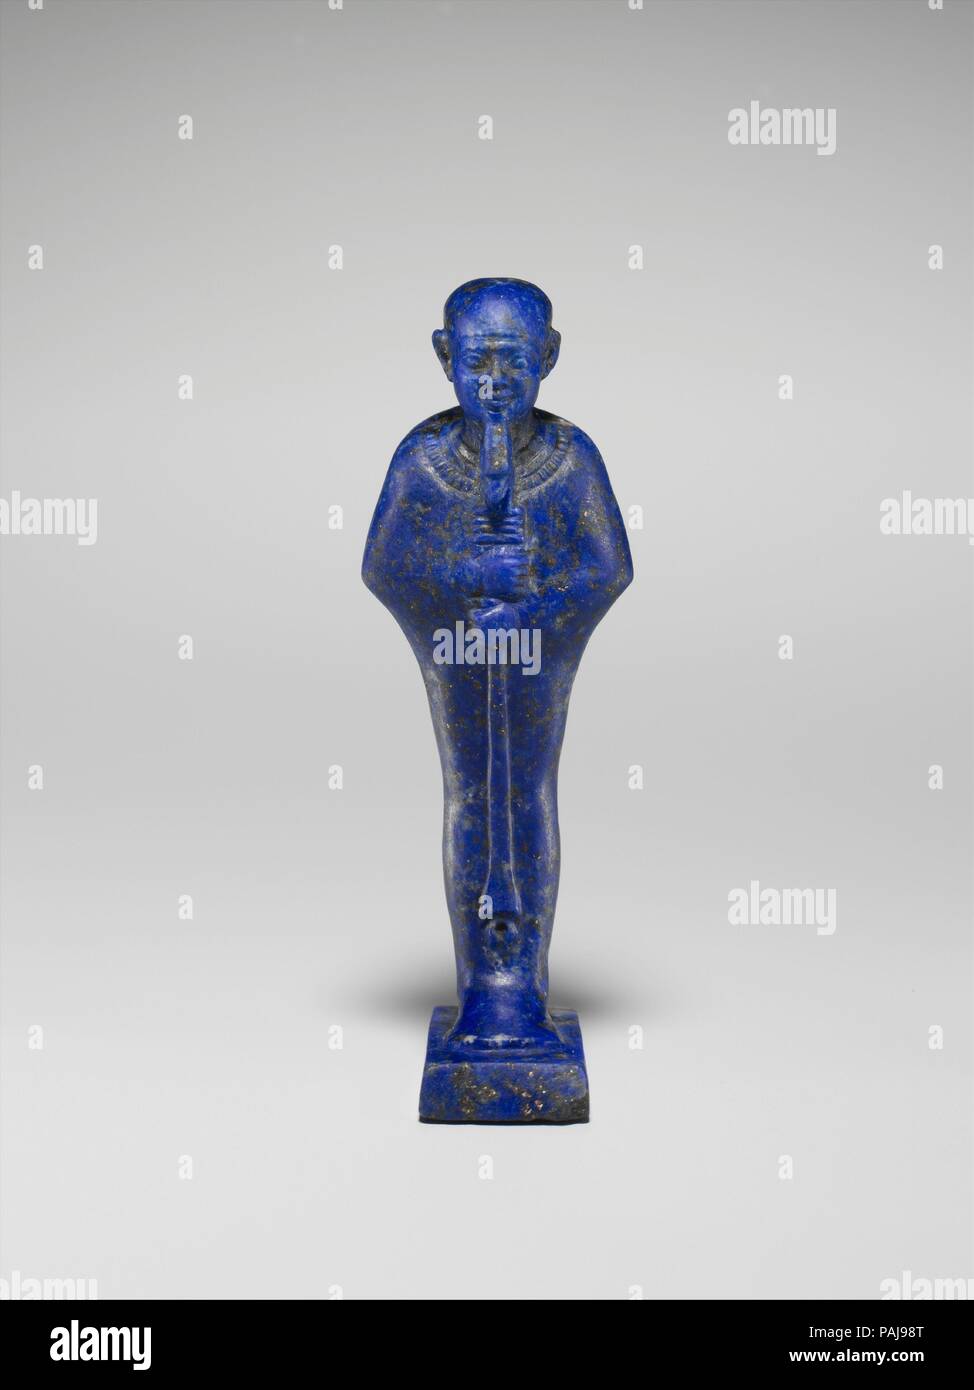 Cult Image of the God Ptah. Dimensions: Height of figure 5.2 cm (2 1/16 in); w. 1.8 cm (11/16 in); d. 1.1 cm (7/16 in.); Height of dais 0.4 cm (3/16 in); w 1.0 cm (3/8 in); d 1.6 cm (5/8 in). Date: ca. 945-600 B.C..  This statuette depicts Ptah, the chief god of Egypt's capital city Memphis, who is easy to identify by his tight-fitting cap and enveloping shroud.  Other iconographic details, such as the royal beard, the large and detailed broad collar, the scepter of merged 'was' and 'djed' signs, and a platform representing the hieroglyph for universal order, as well as the brilliant blue ston Stock Photo